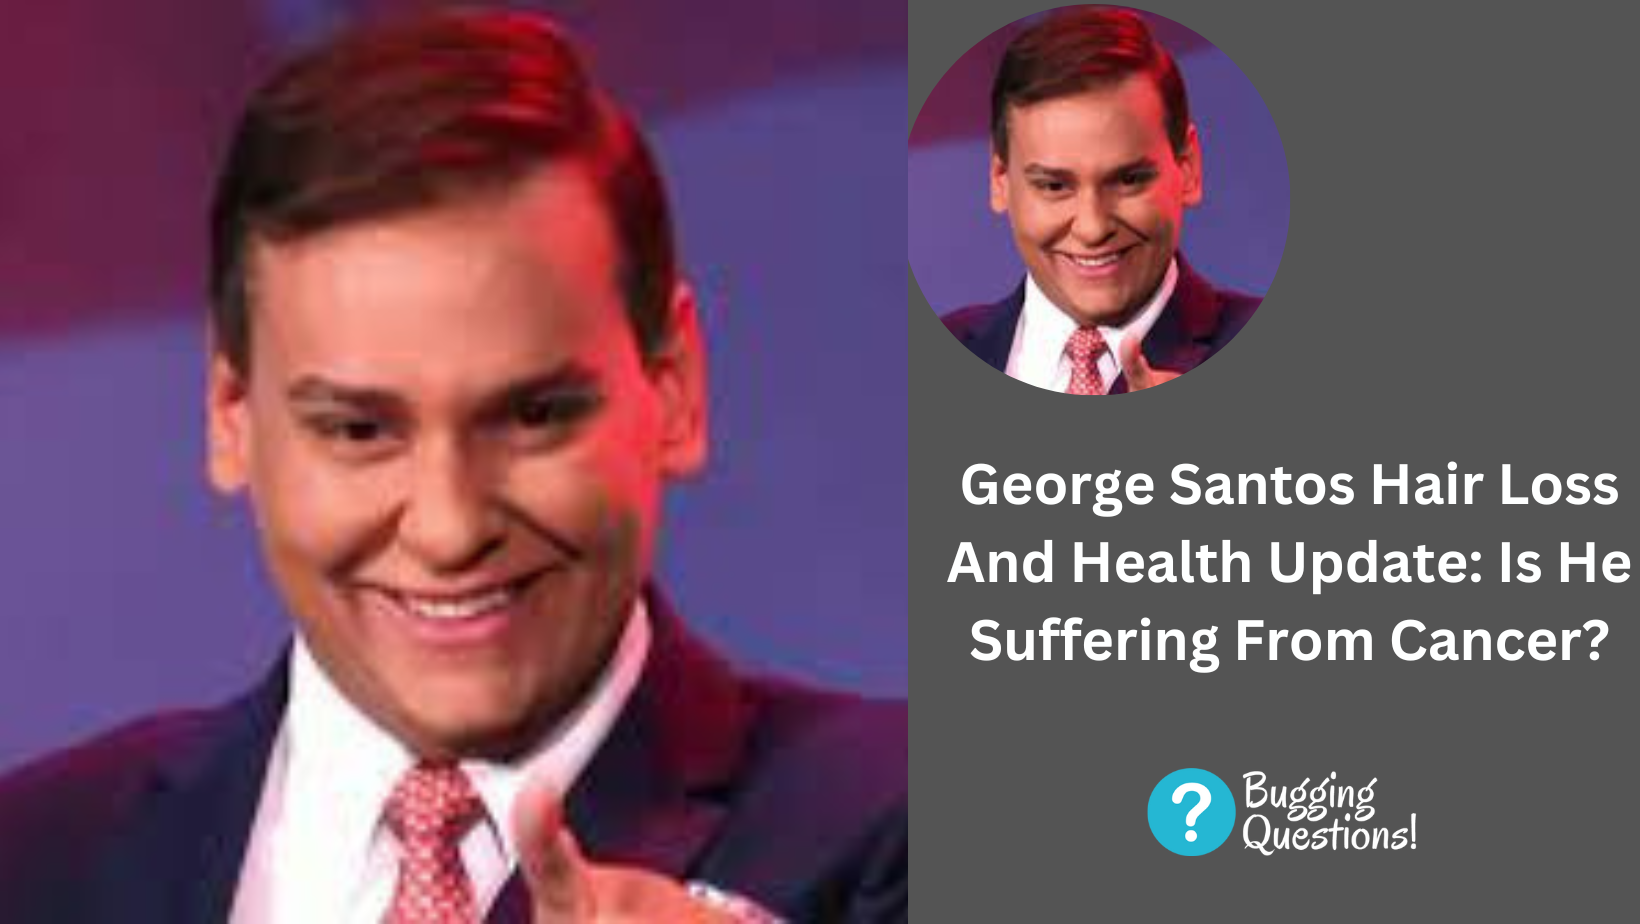 George Santos Hair Loss And Health Update: Is He Suffering From Cancer? Health And Net Worth Explored